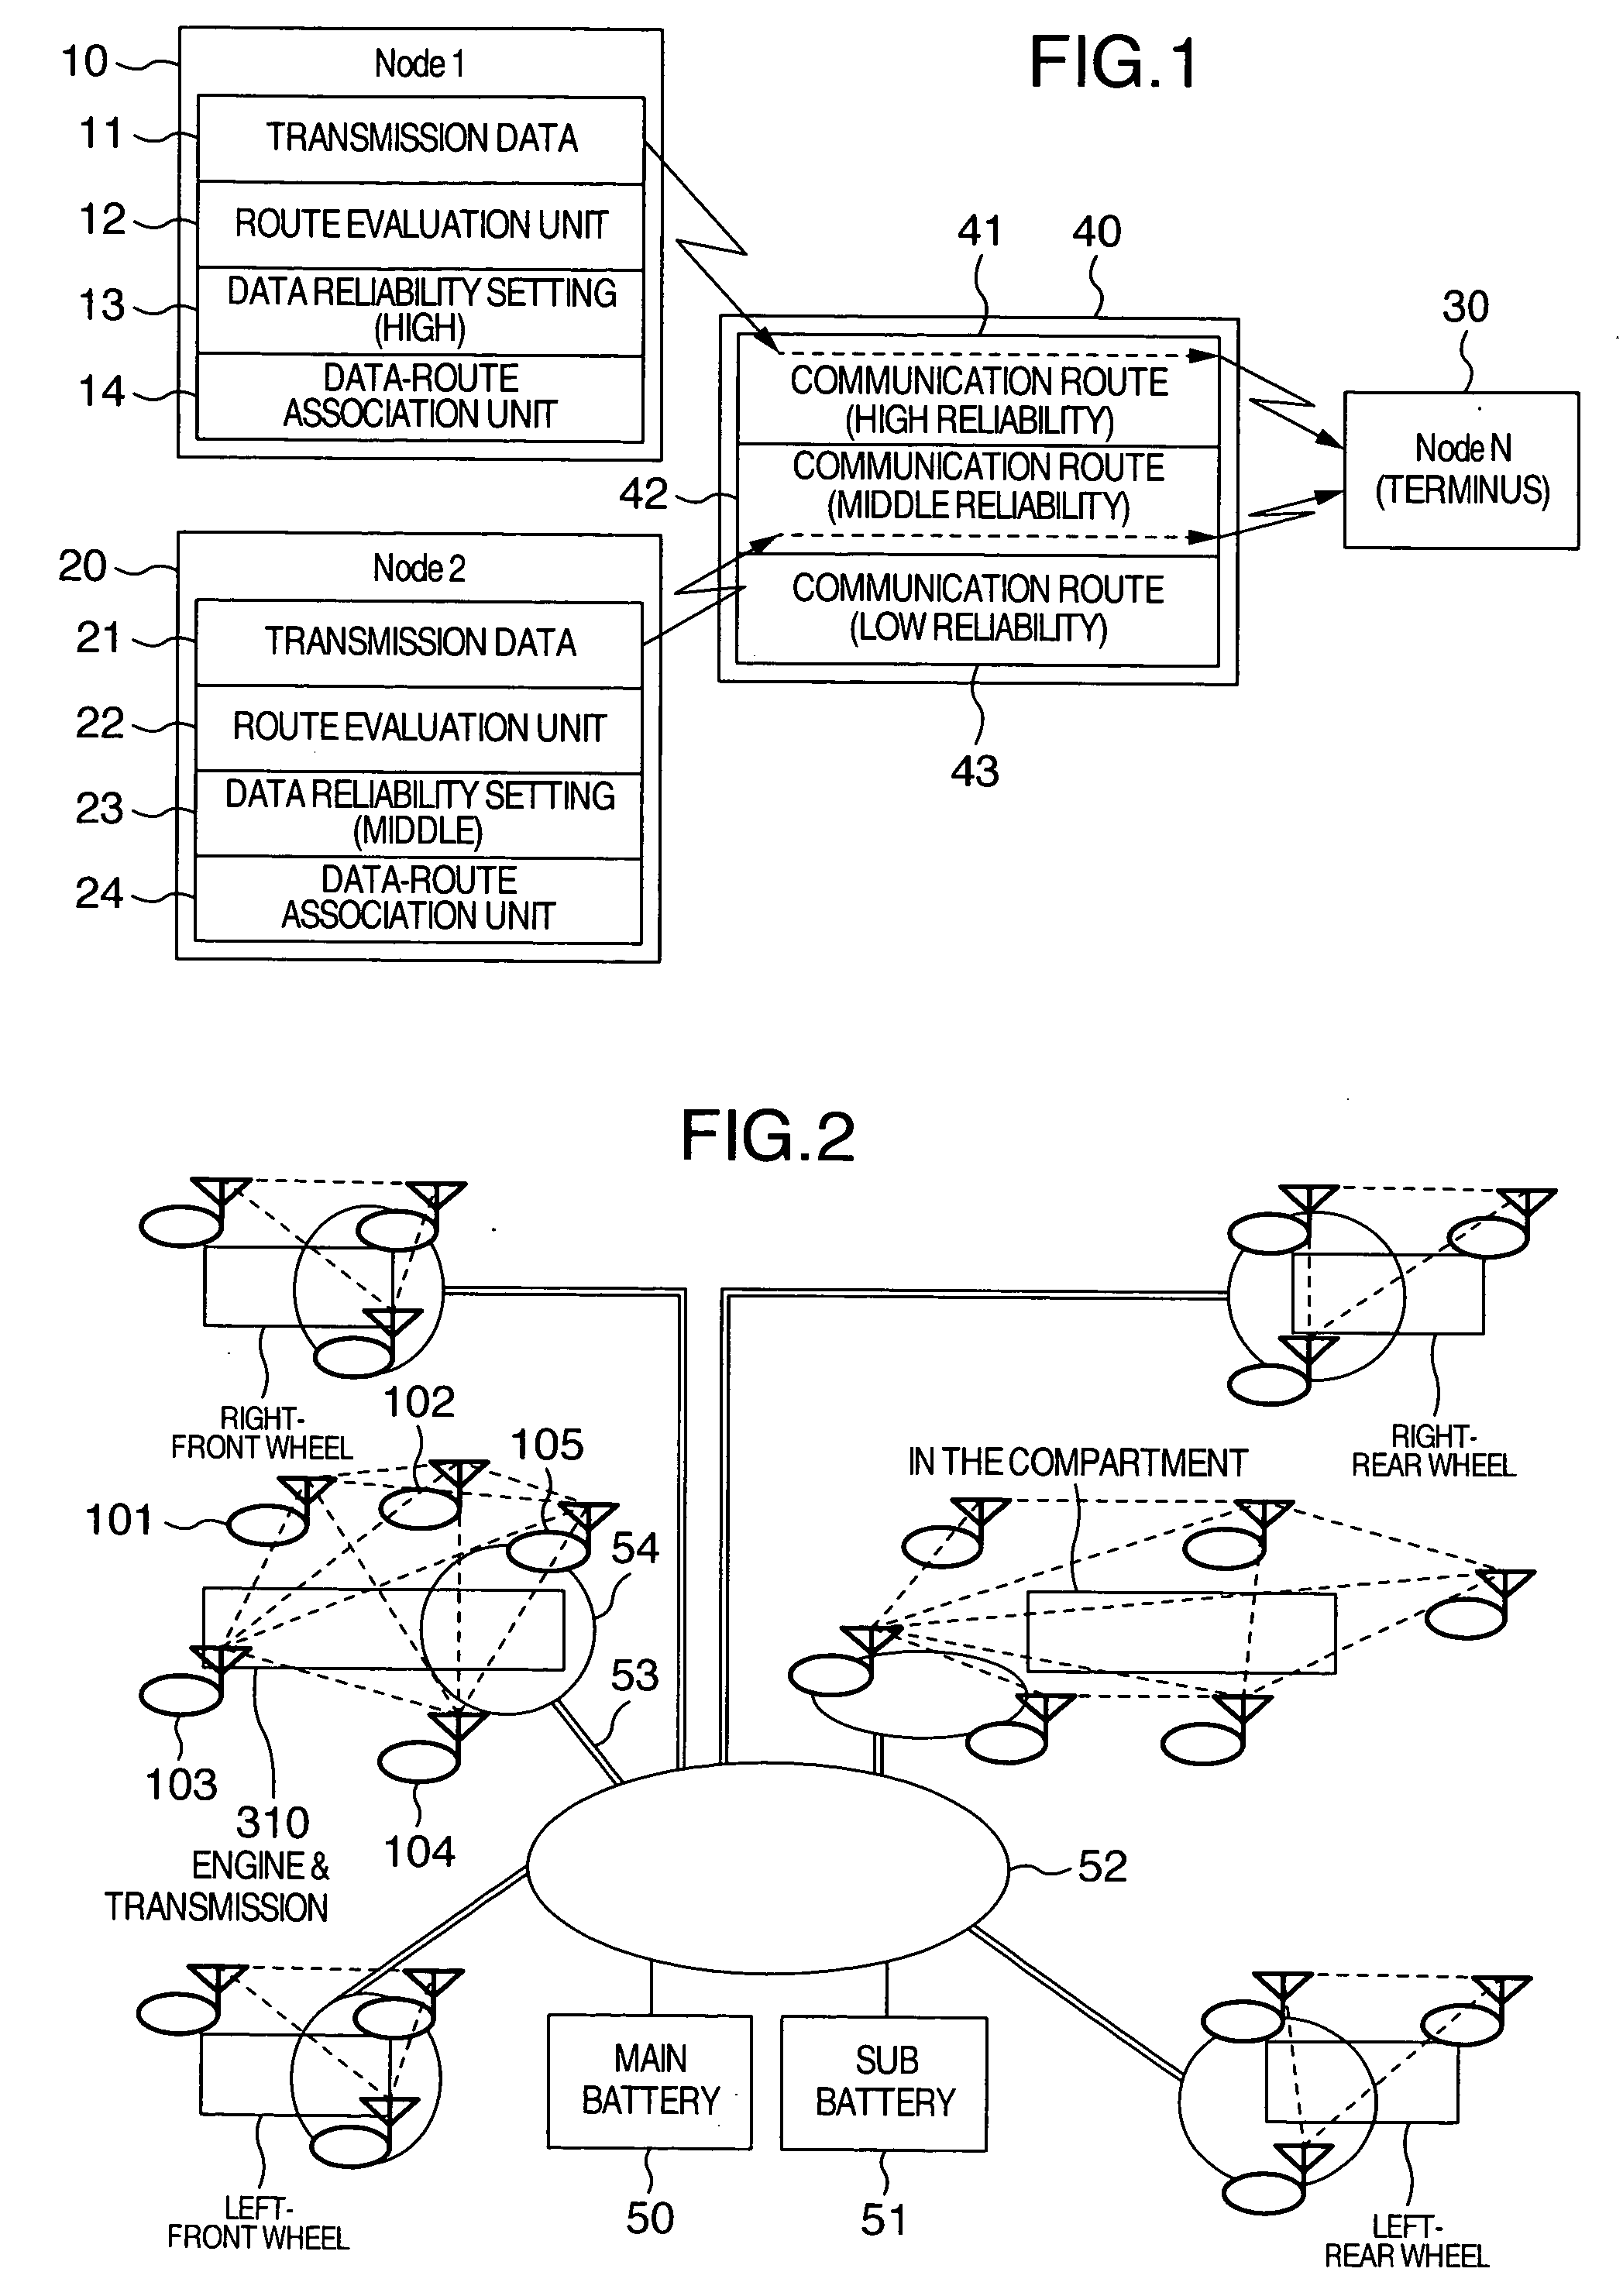 Radio communications system for controlling a vehicle